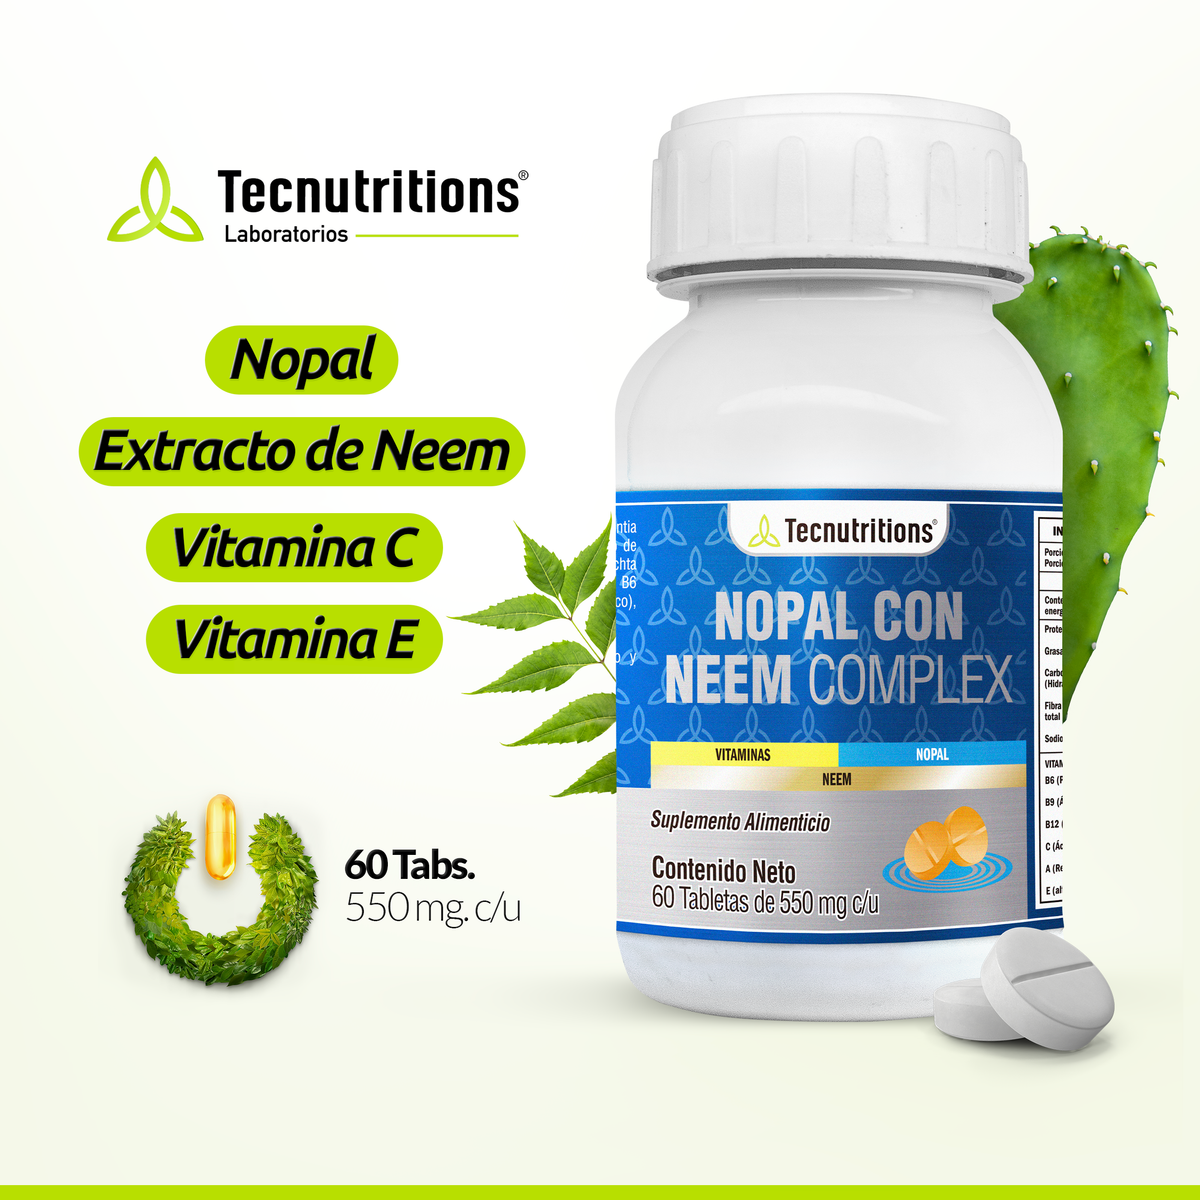 Food supplement with vitamins, antioxidants and fiber, Nopal with Neem Complex, 60 tabl